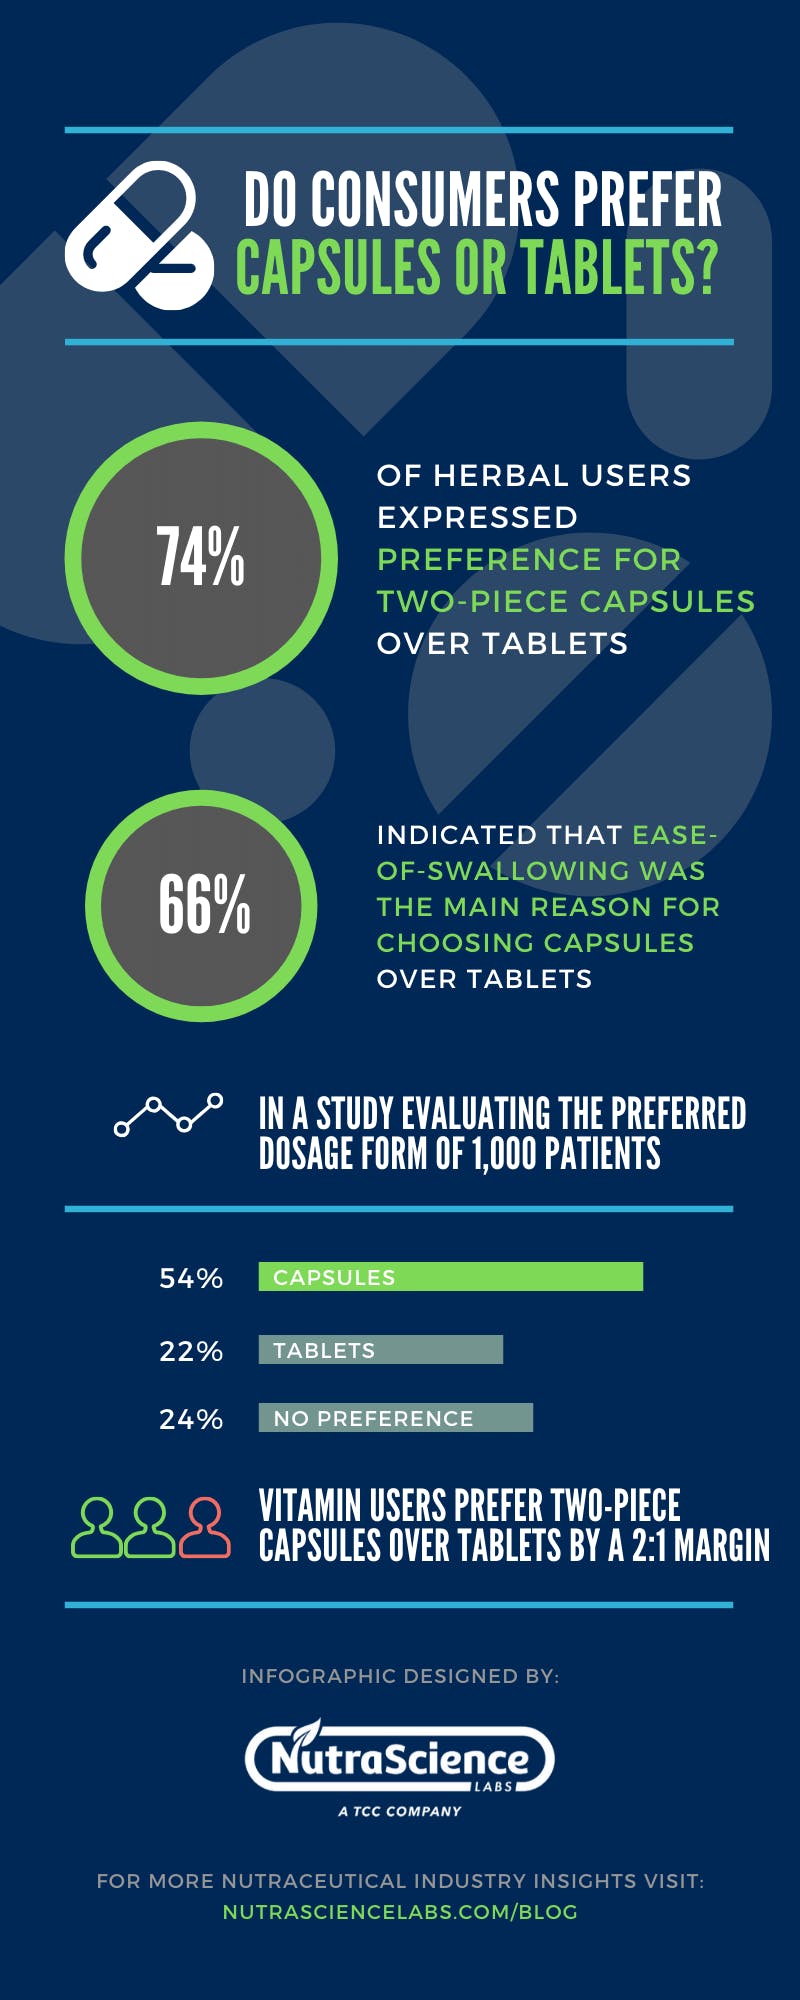 Infographic by NutraScience Labs detailing whether consumers prefer tablets or capsules, with conclusion that consumers prefer two-piece capsules